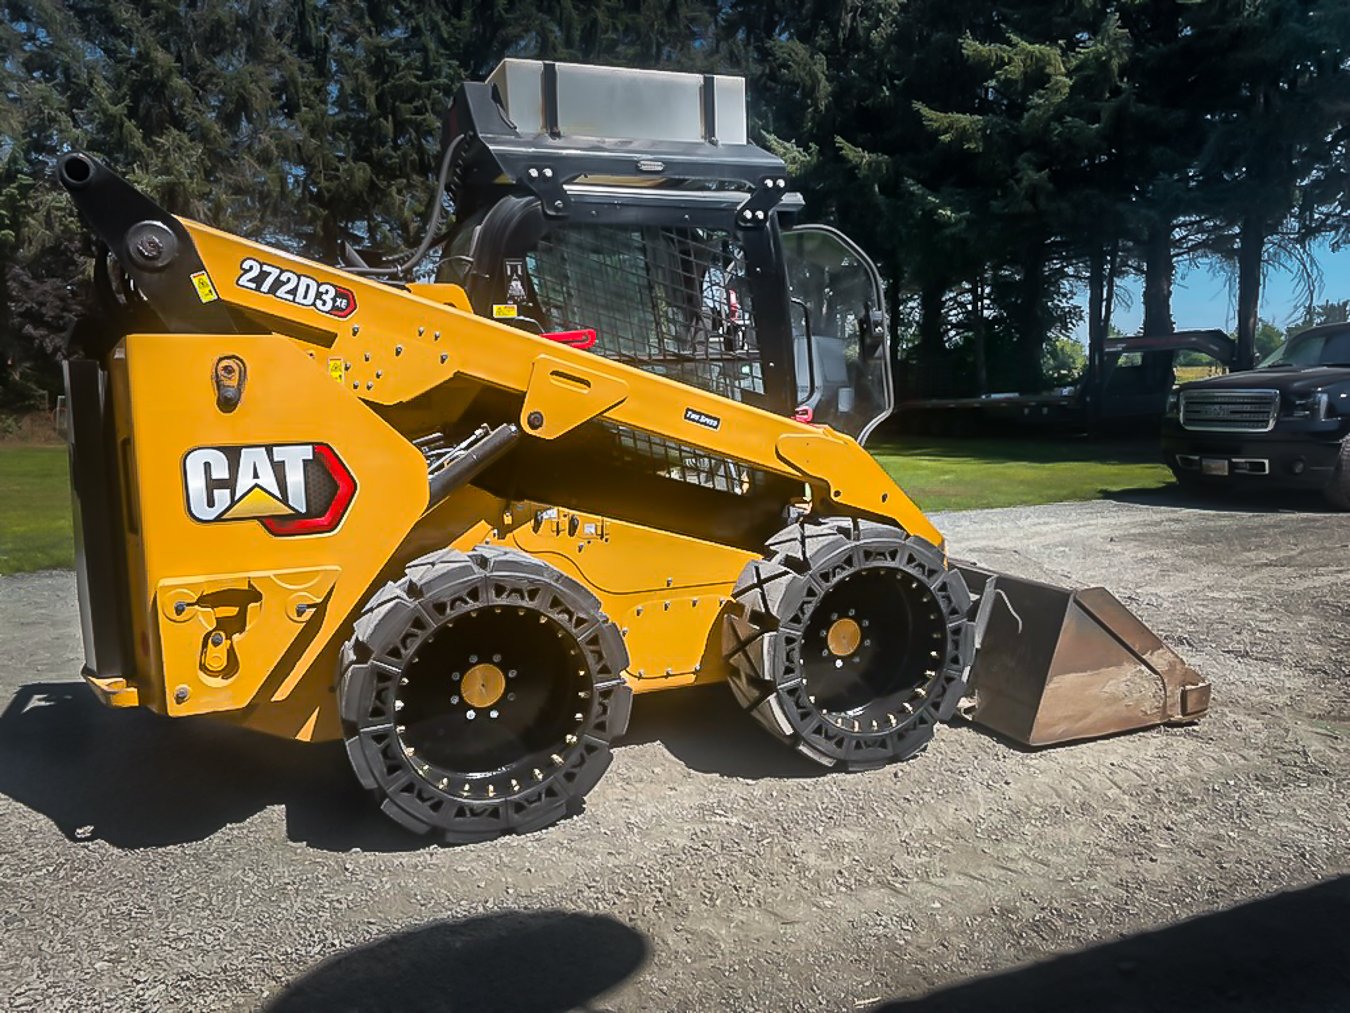 Here is an image that shows a CAT 272D3 HS with the EWRS-HS Bobcat skid steer tires installed